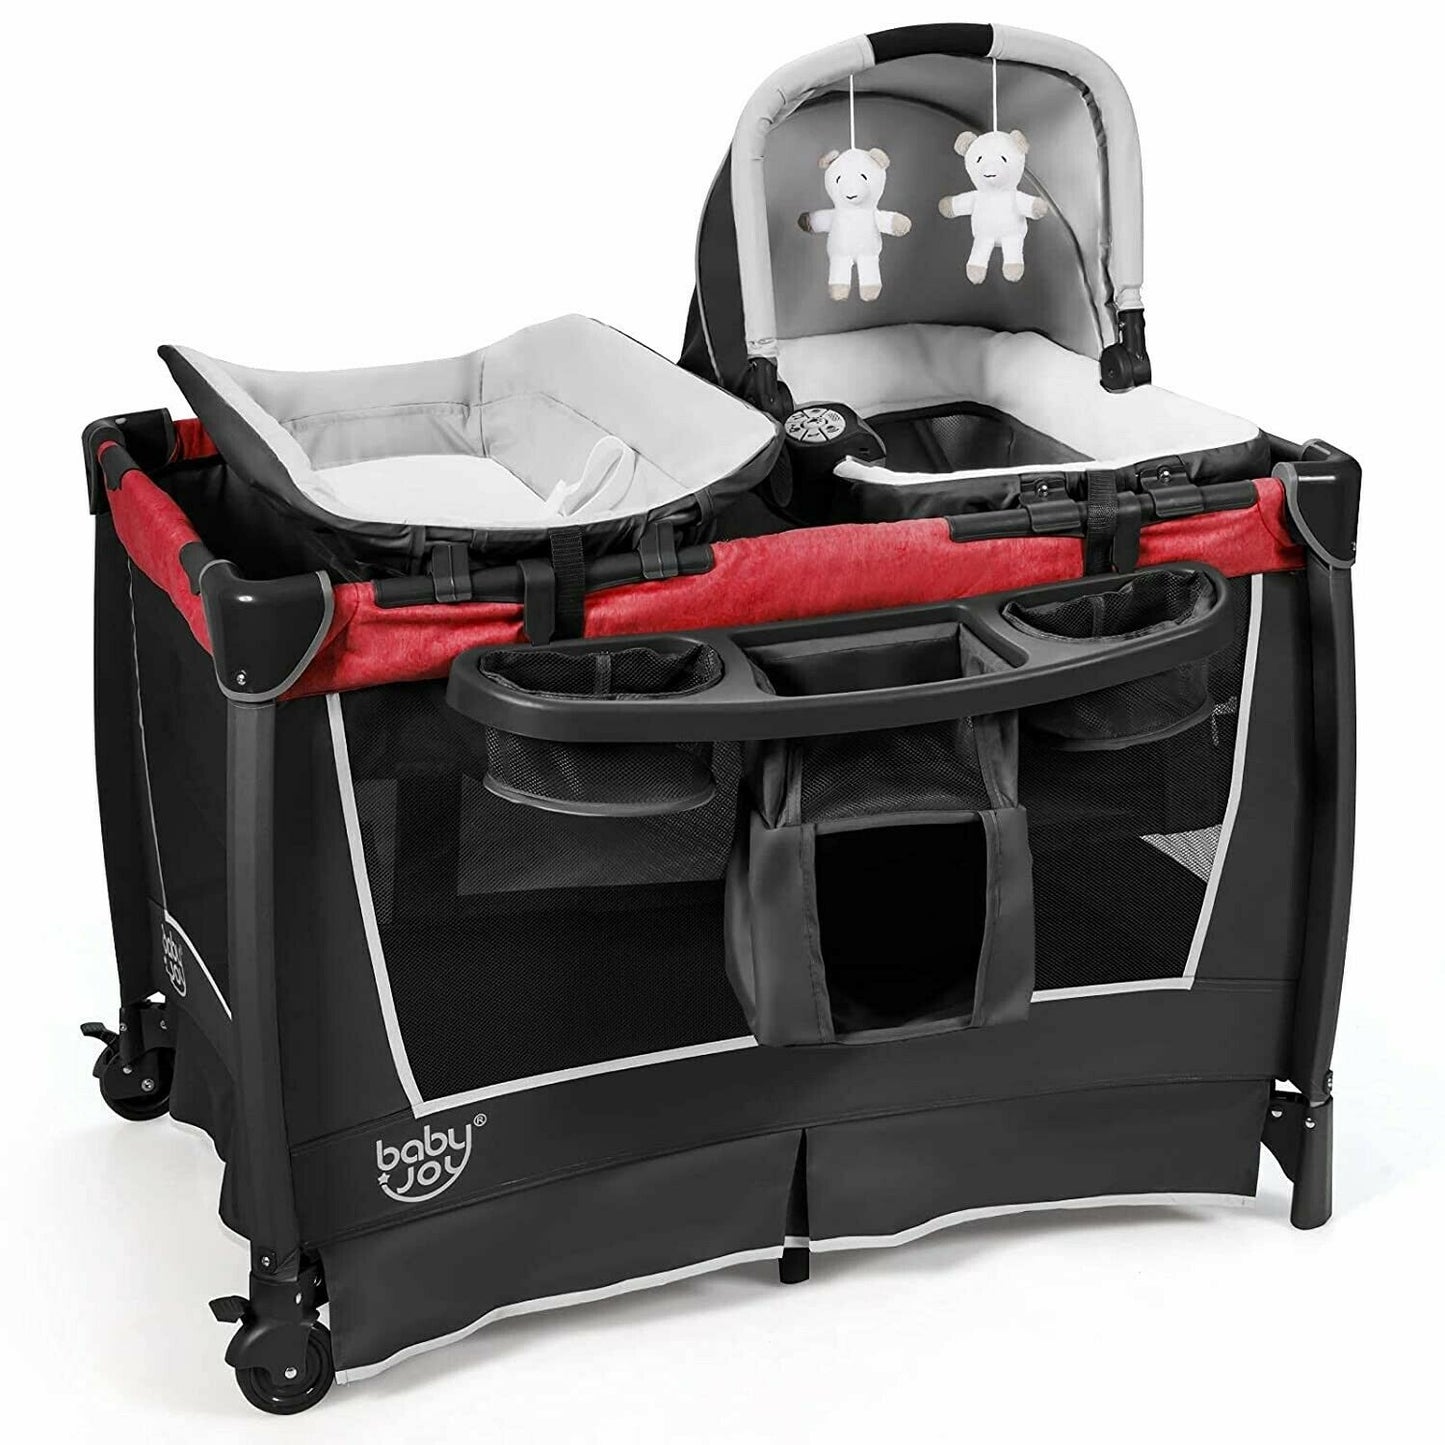 Graco Baby Boy Stroller Travel System with Car Seat Playard Basinet Combo